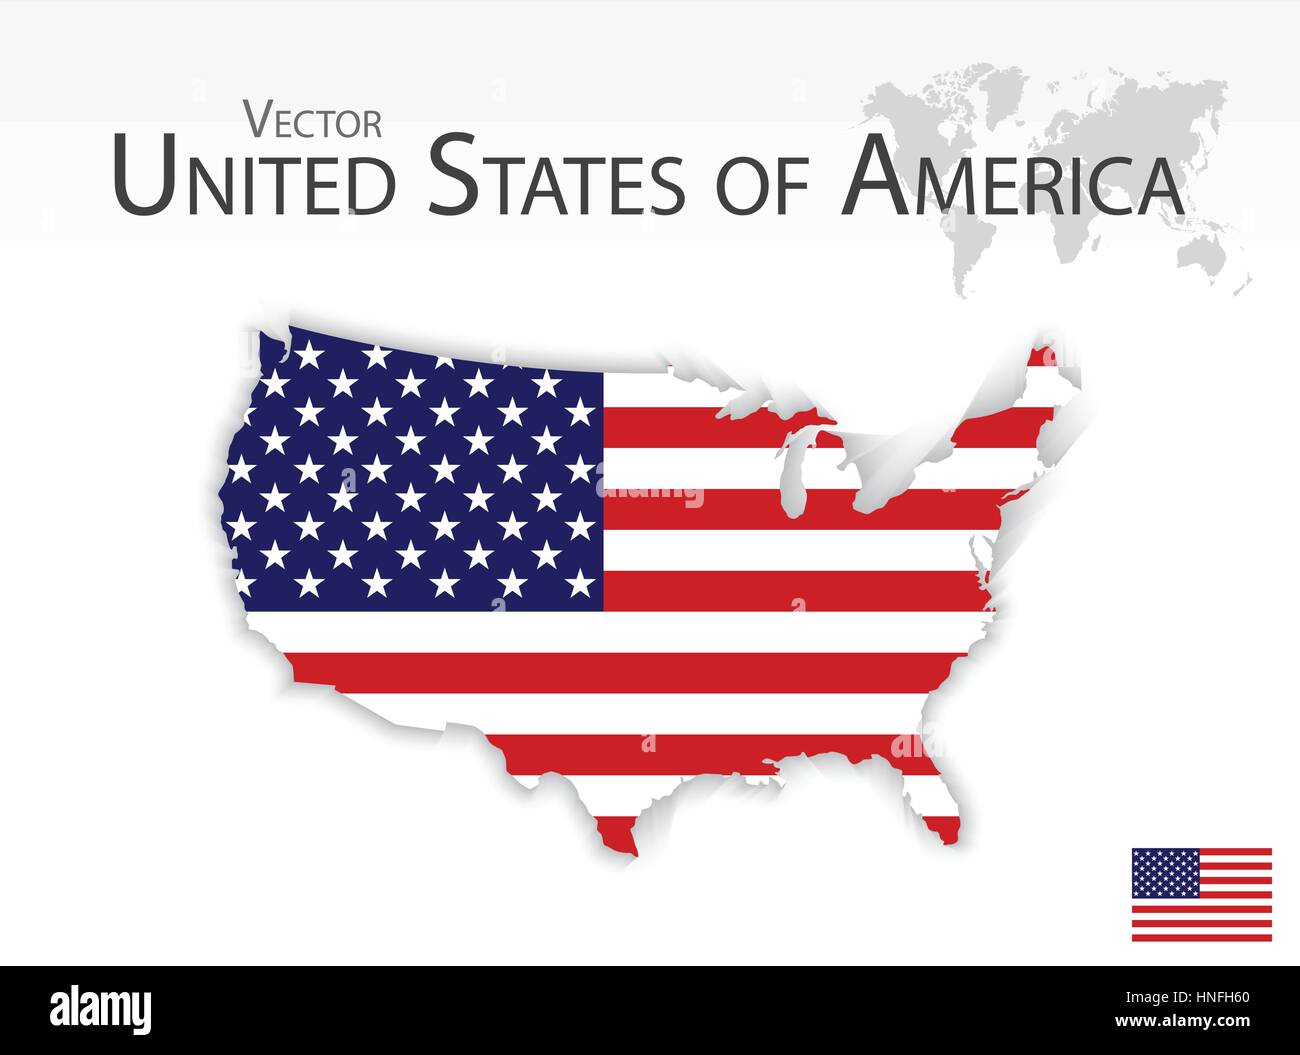 United States of America ( map and flag ) Stock Vector